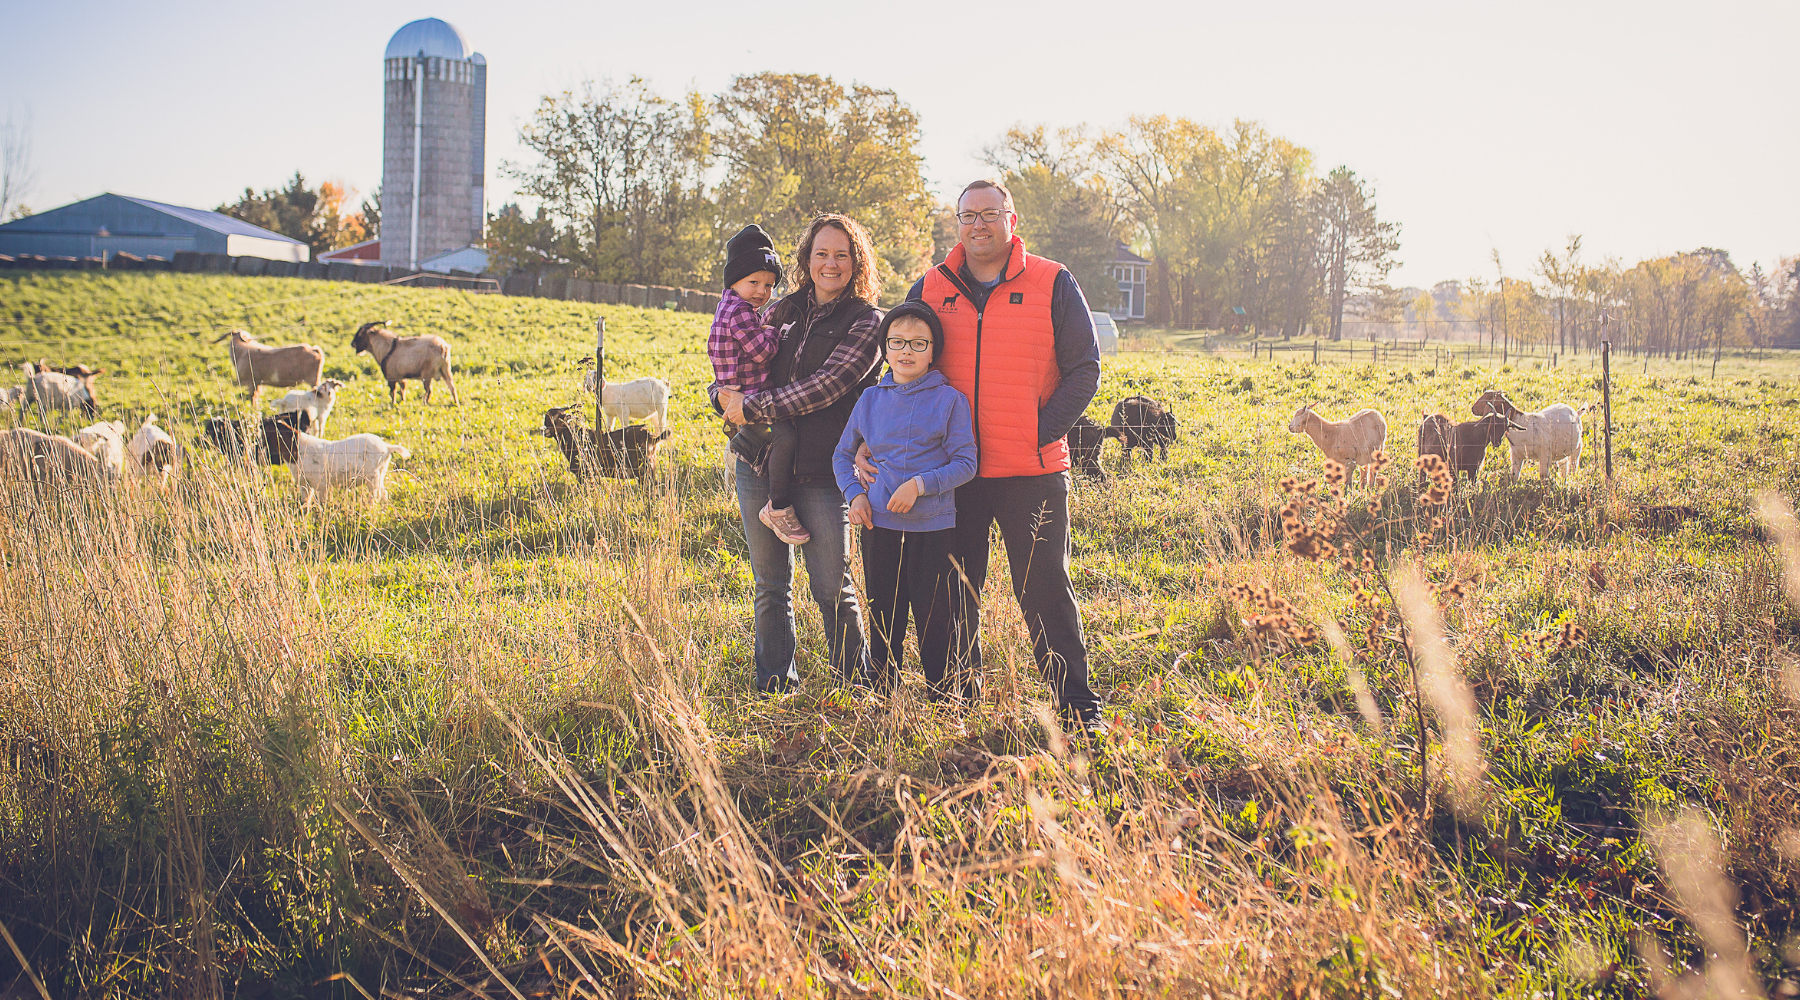 The Svacina Family, who owns Cylon Rolling Acres, a goat farm in Wisconsin